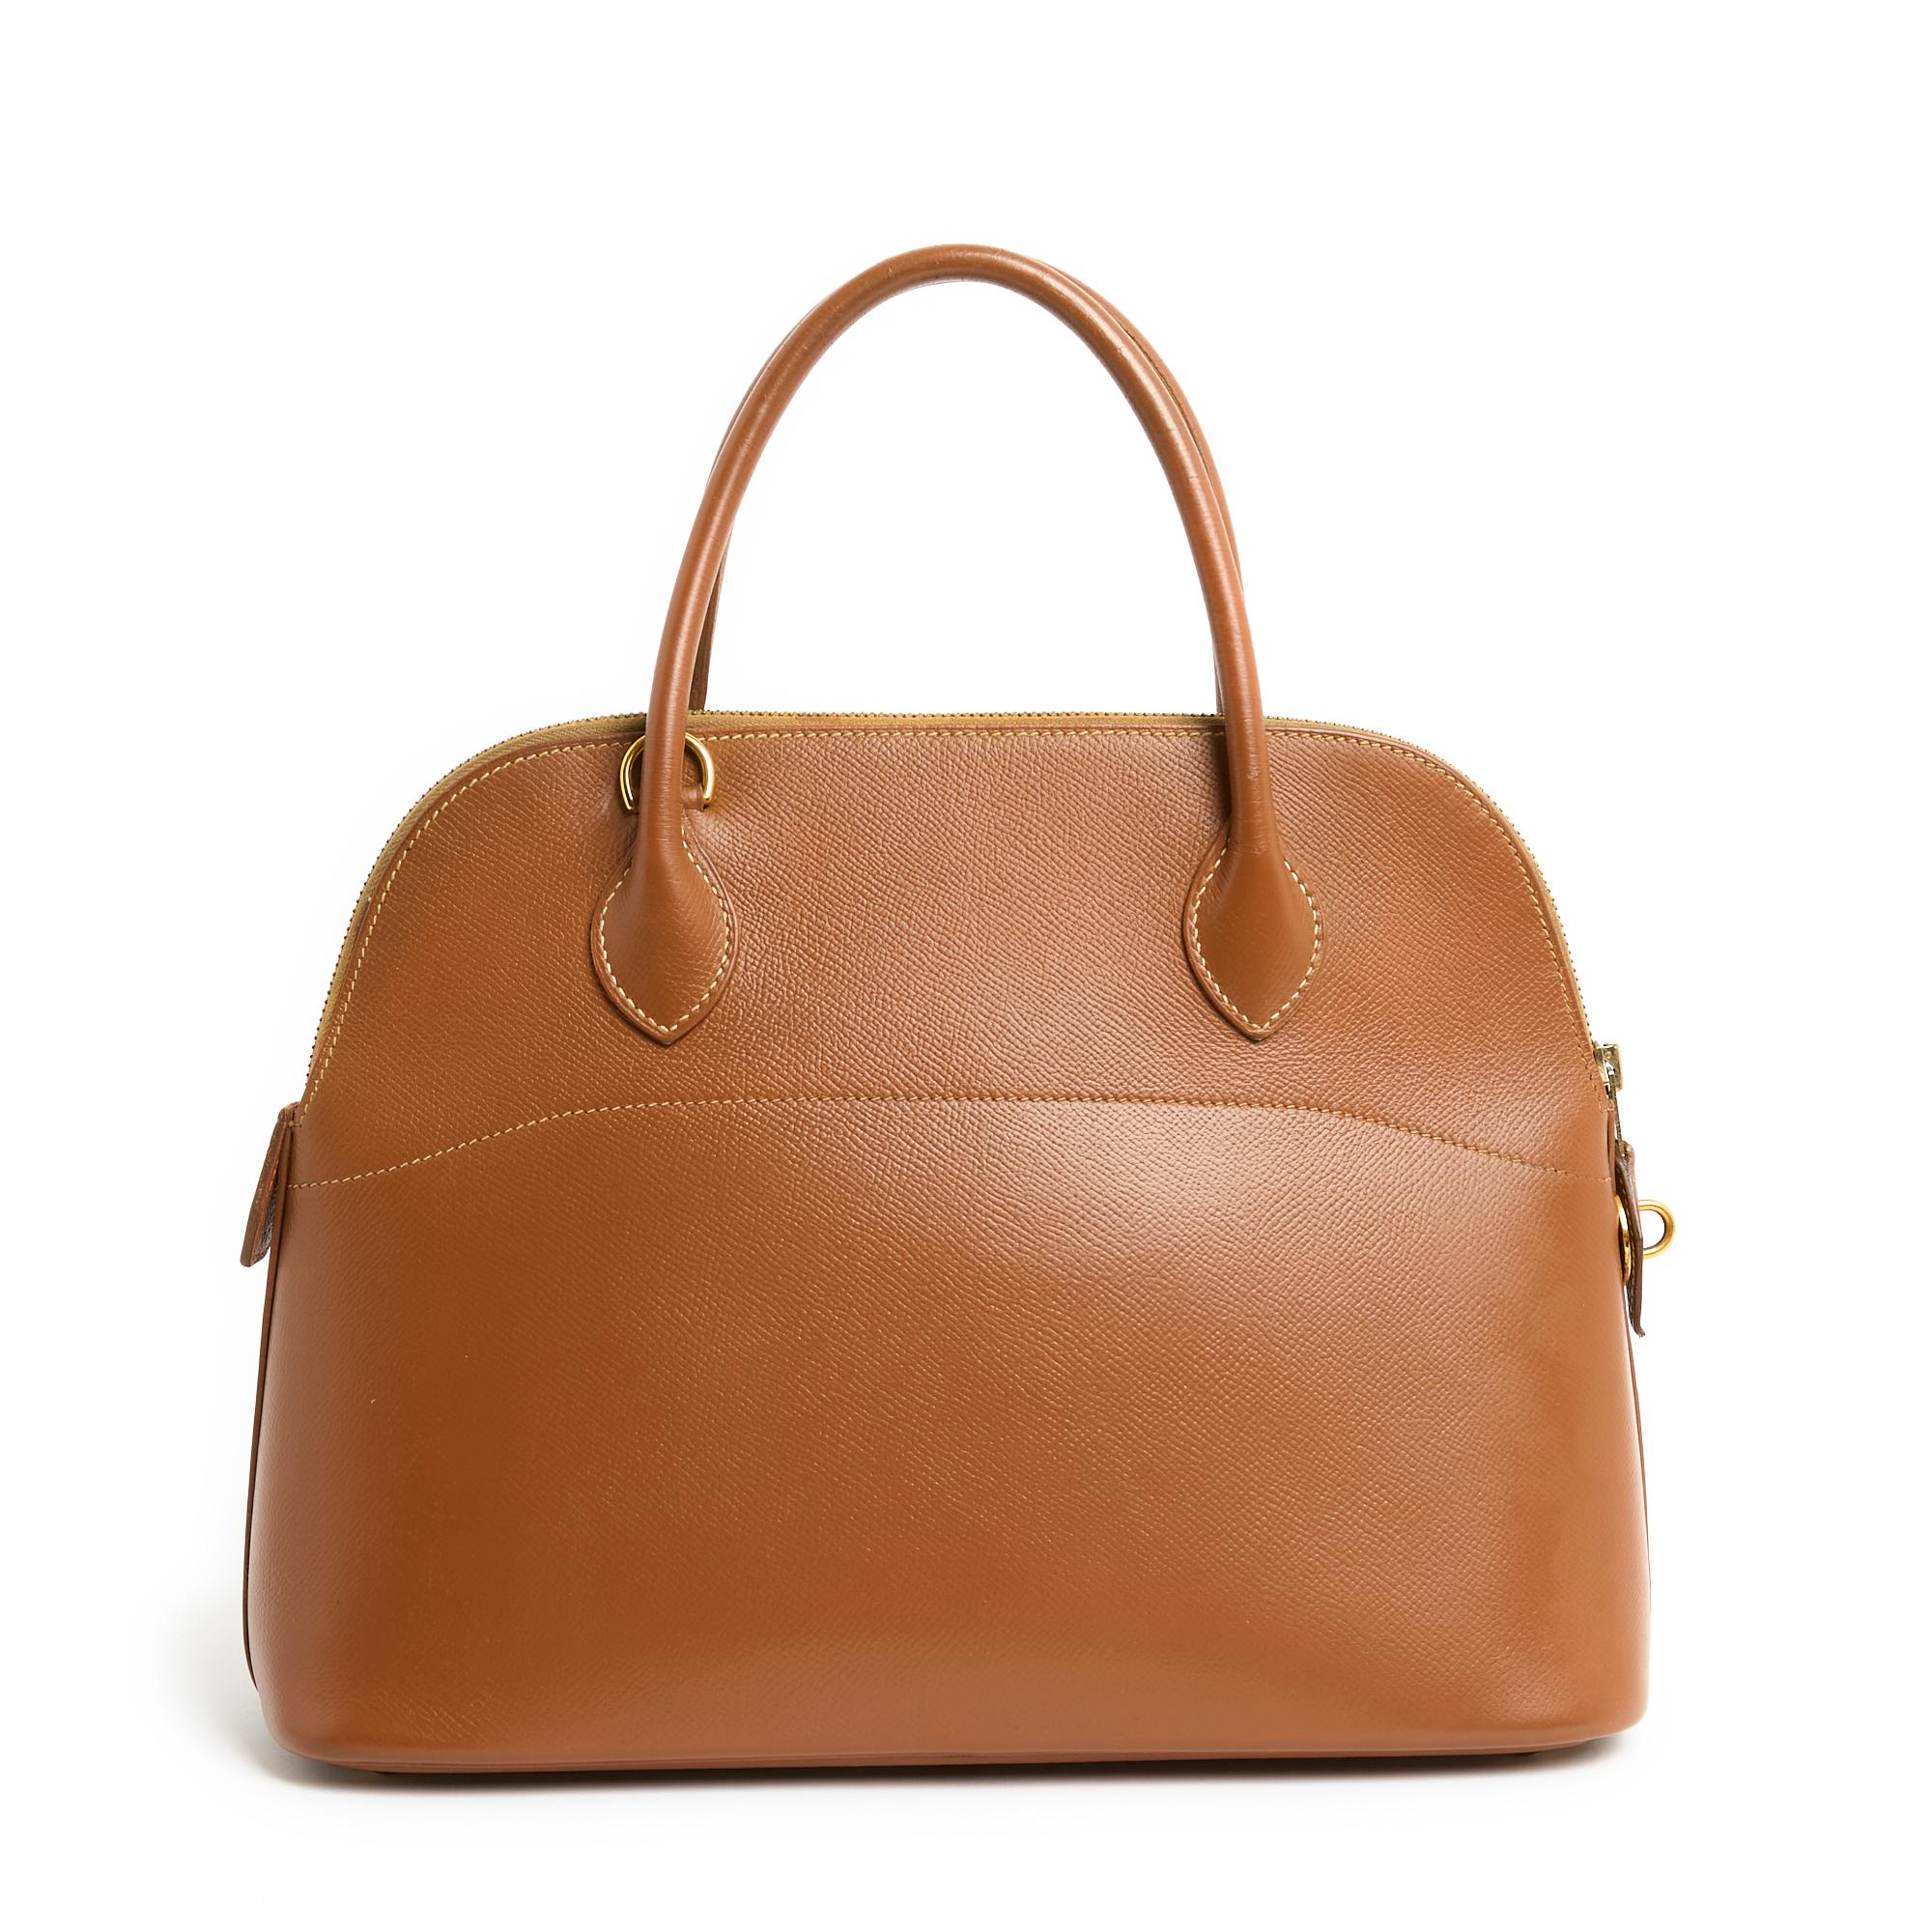 1995 Hermès Bolide 31 Gold Leather Bag with strap In Fair Condition For Sale In PARIS, FR